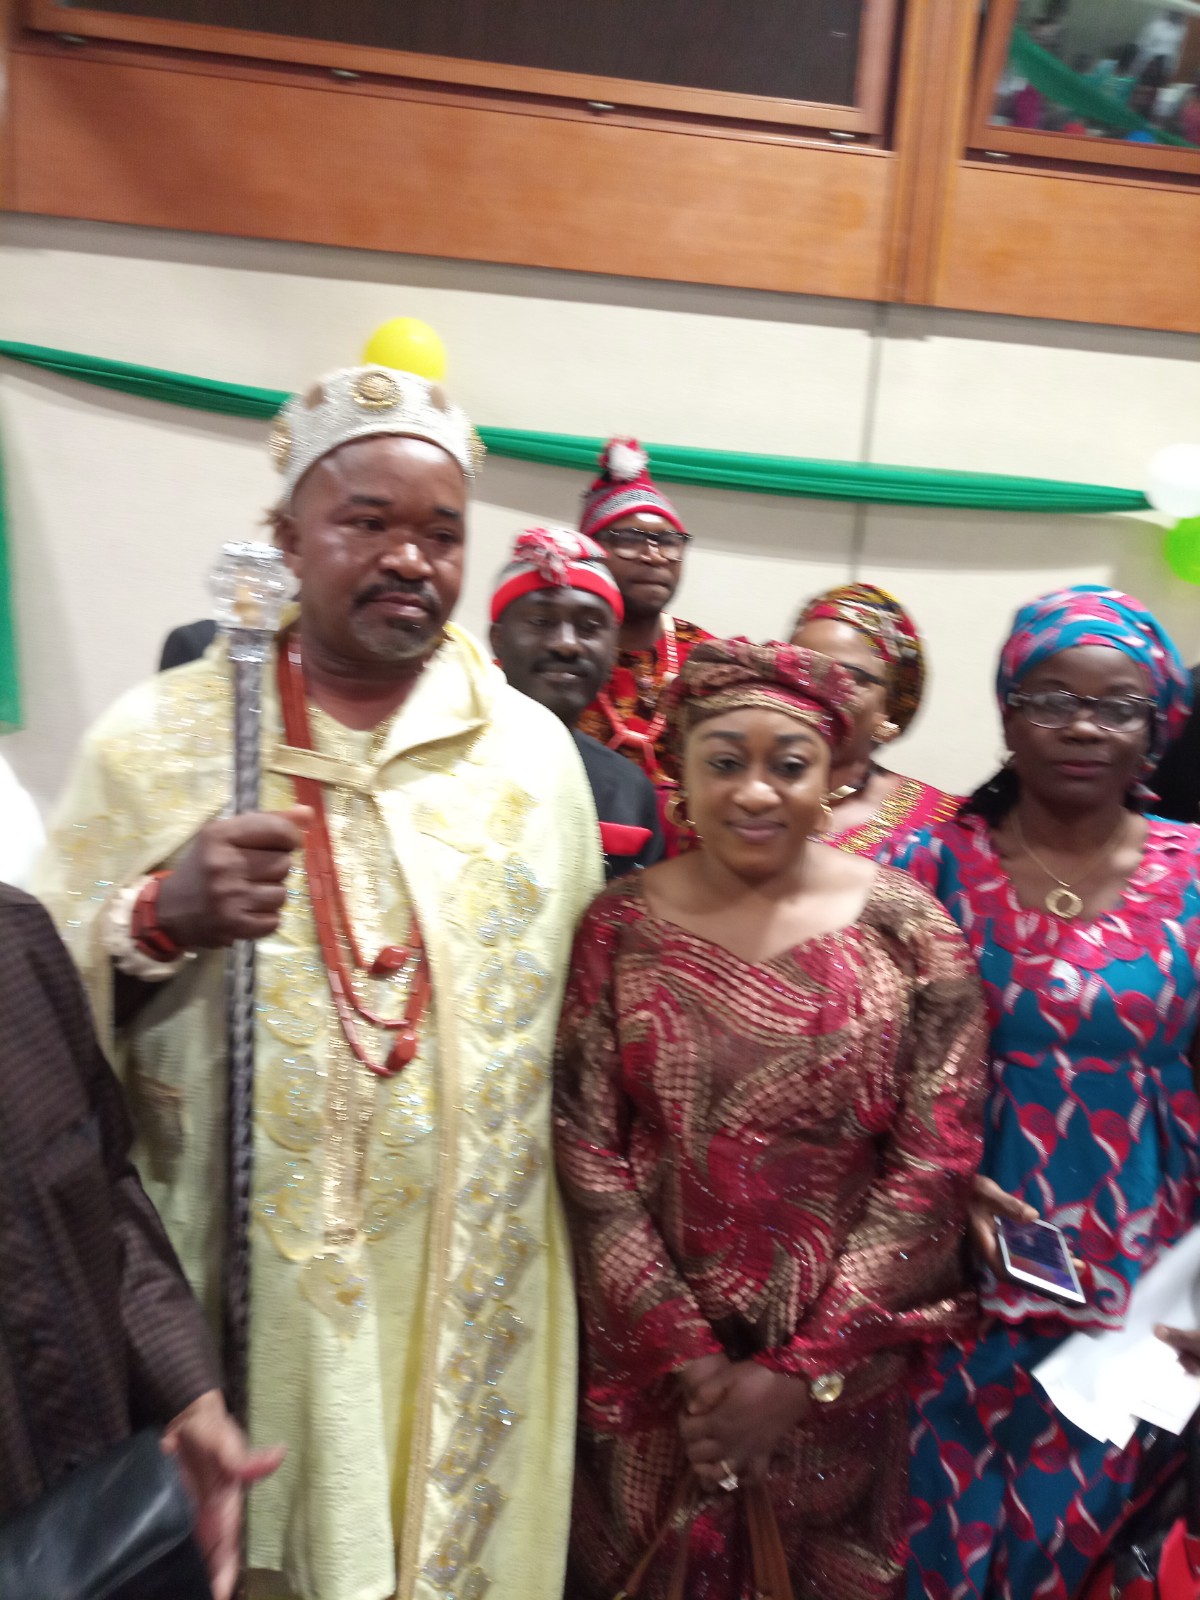 Minister II, Dr. Amina Smaila and staff members with the Igwe at the Igbo Community New Yam Festival in Geneva